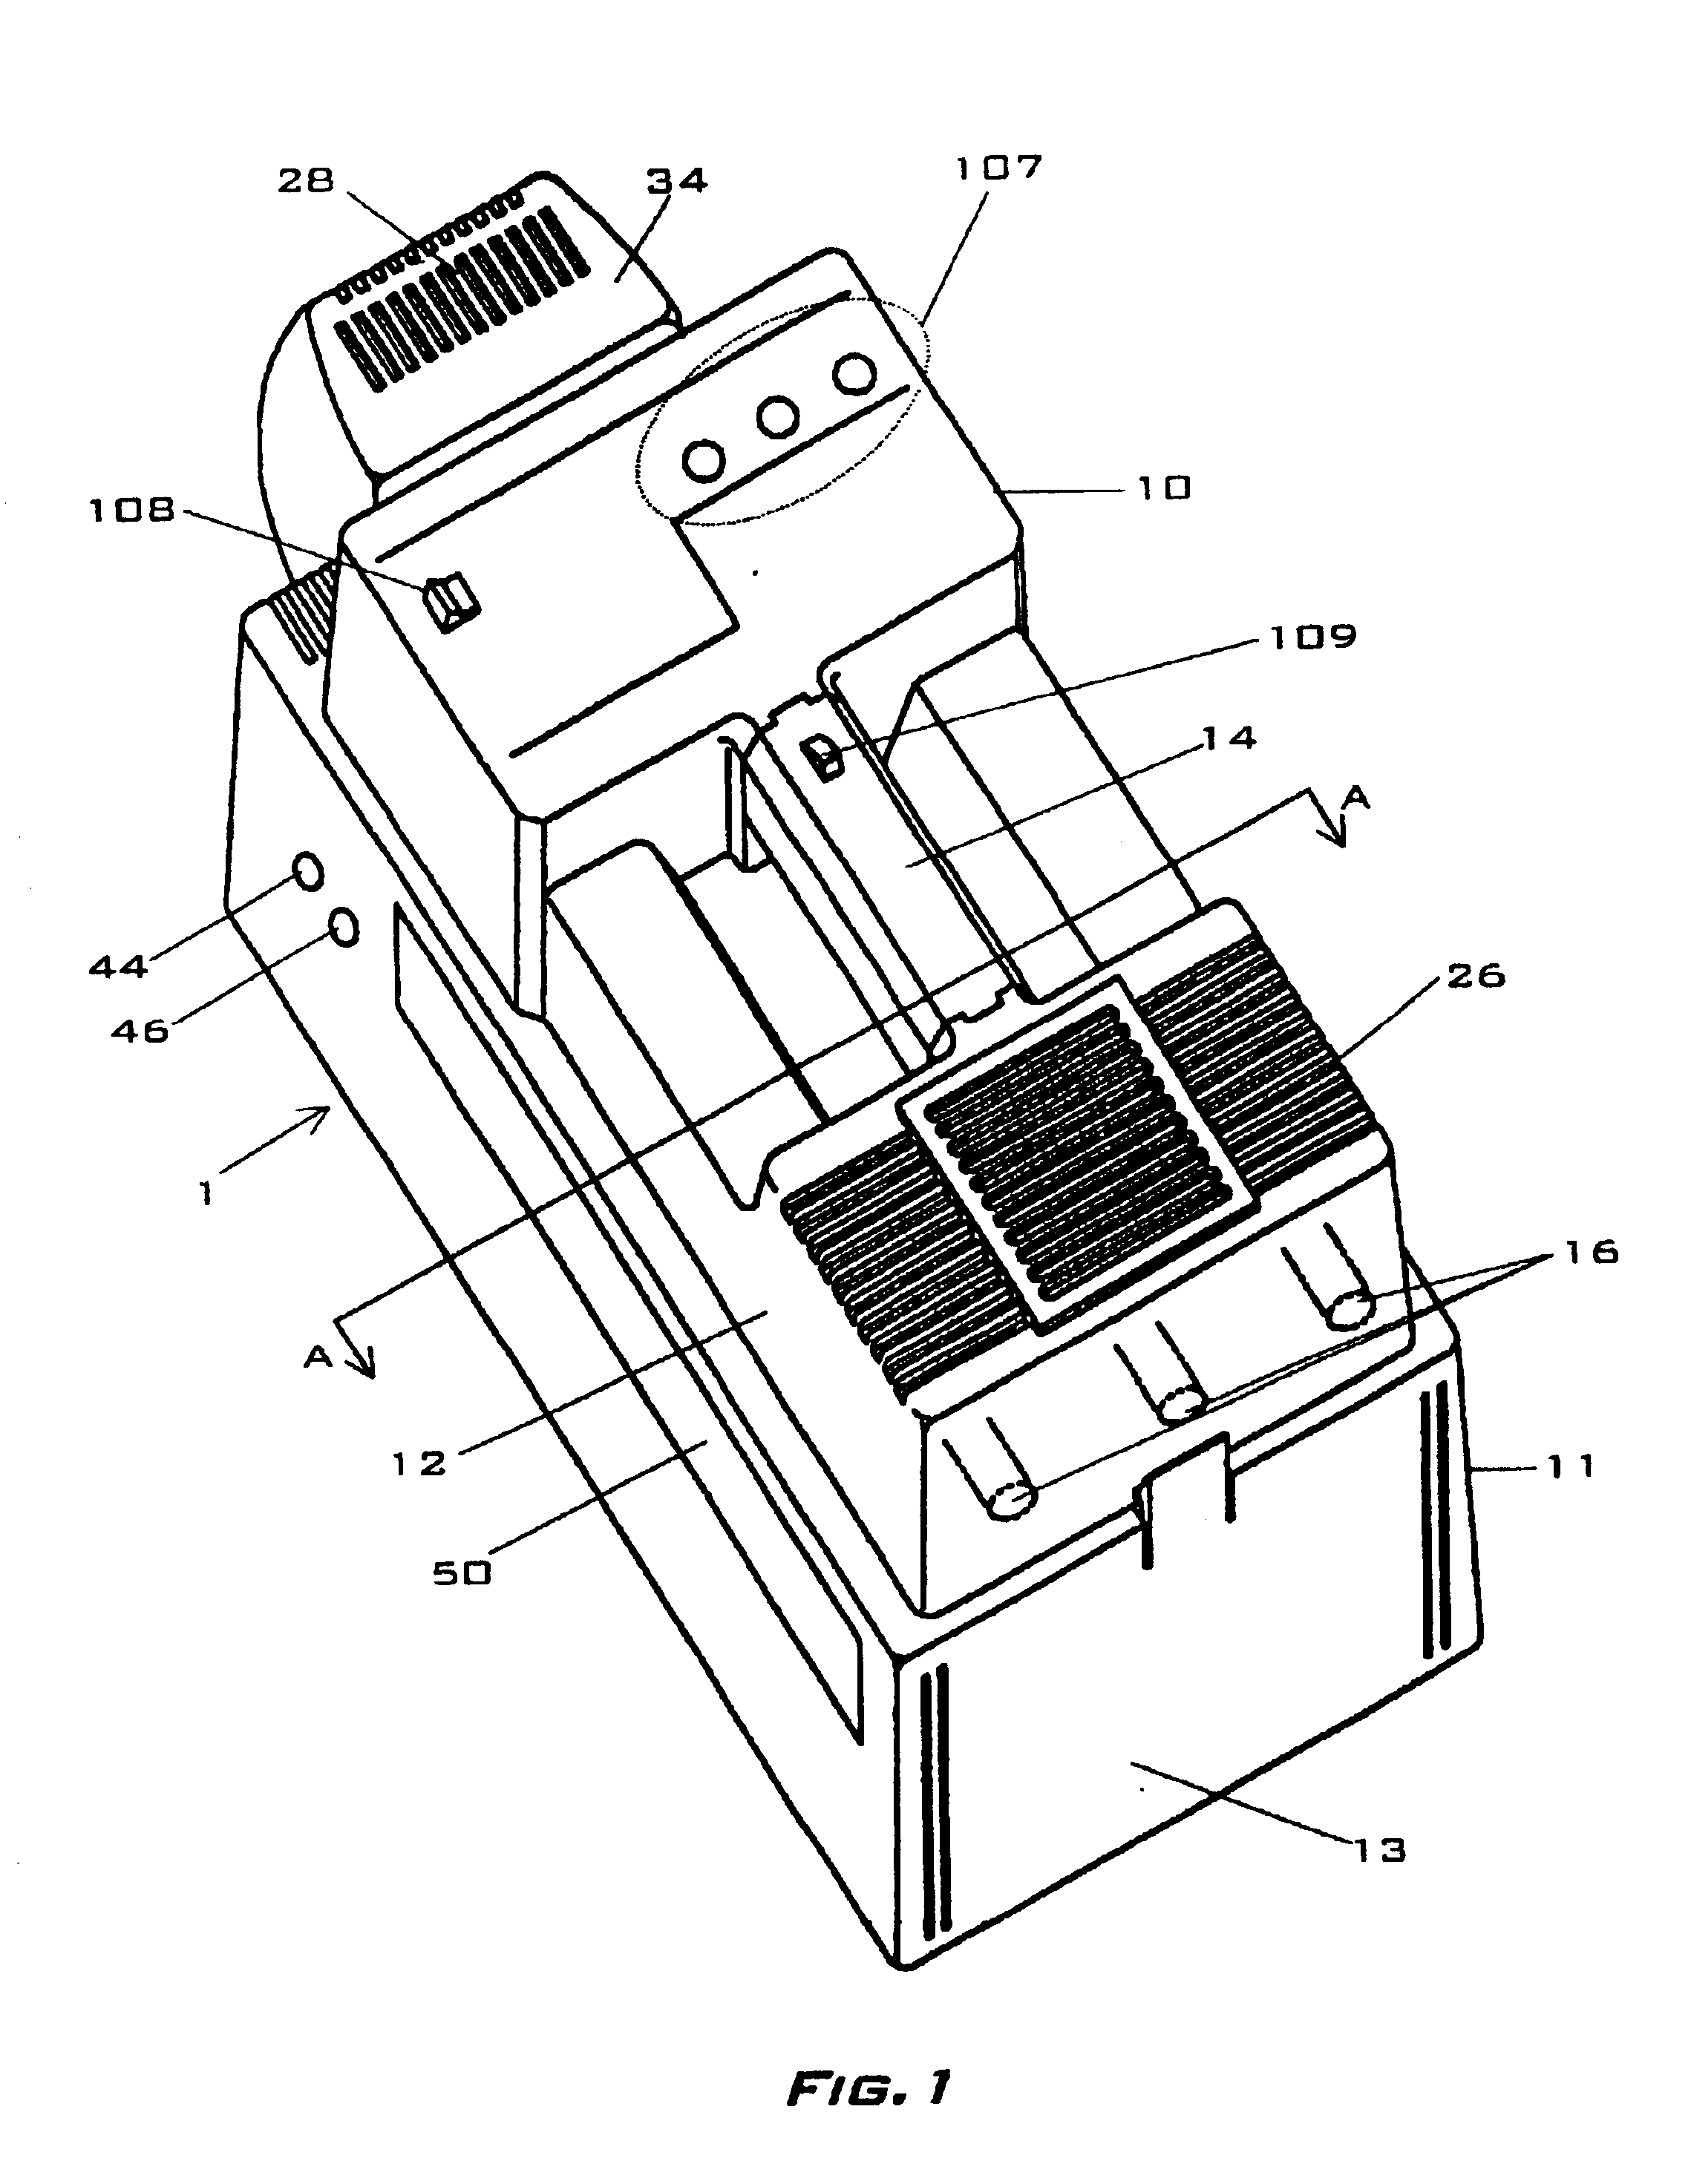 Apparatus for neutralizing chemical and biological threats